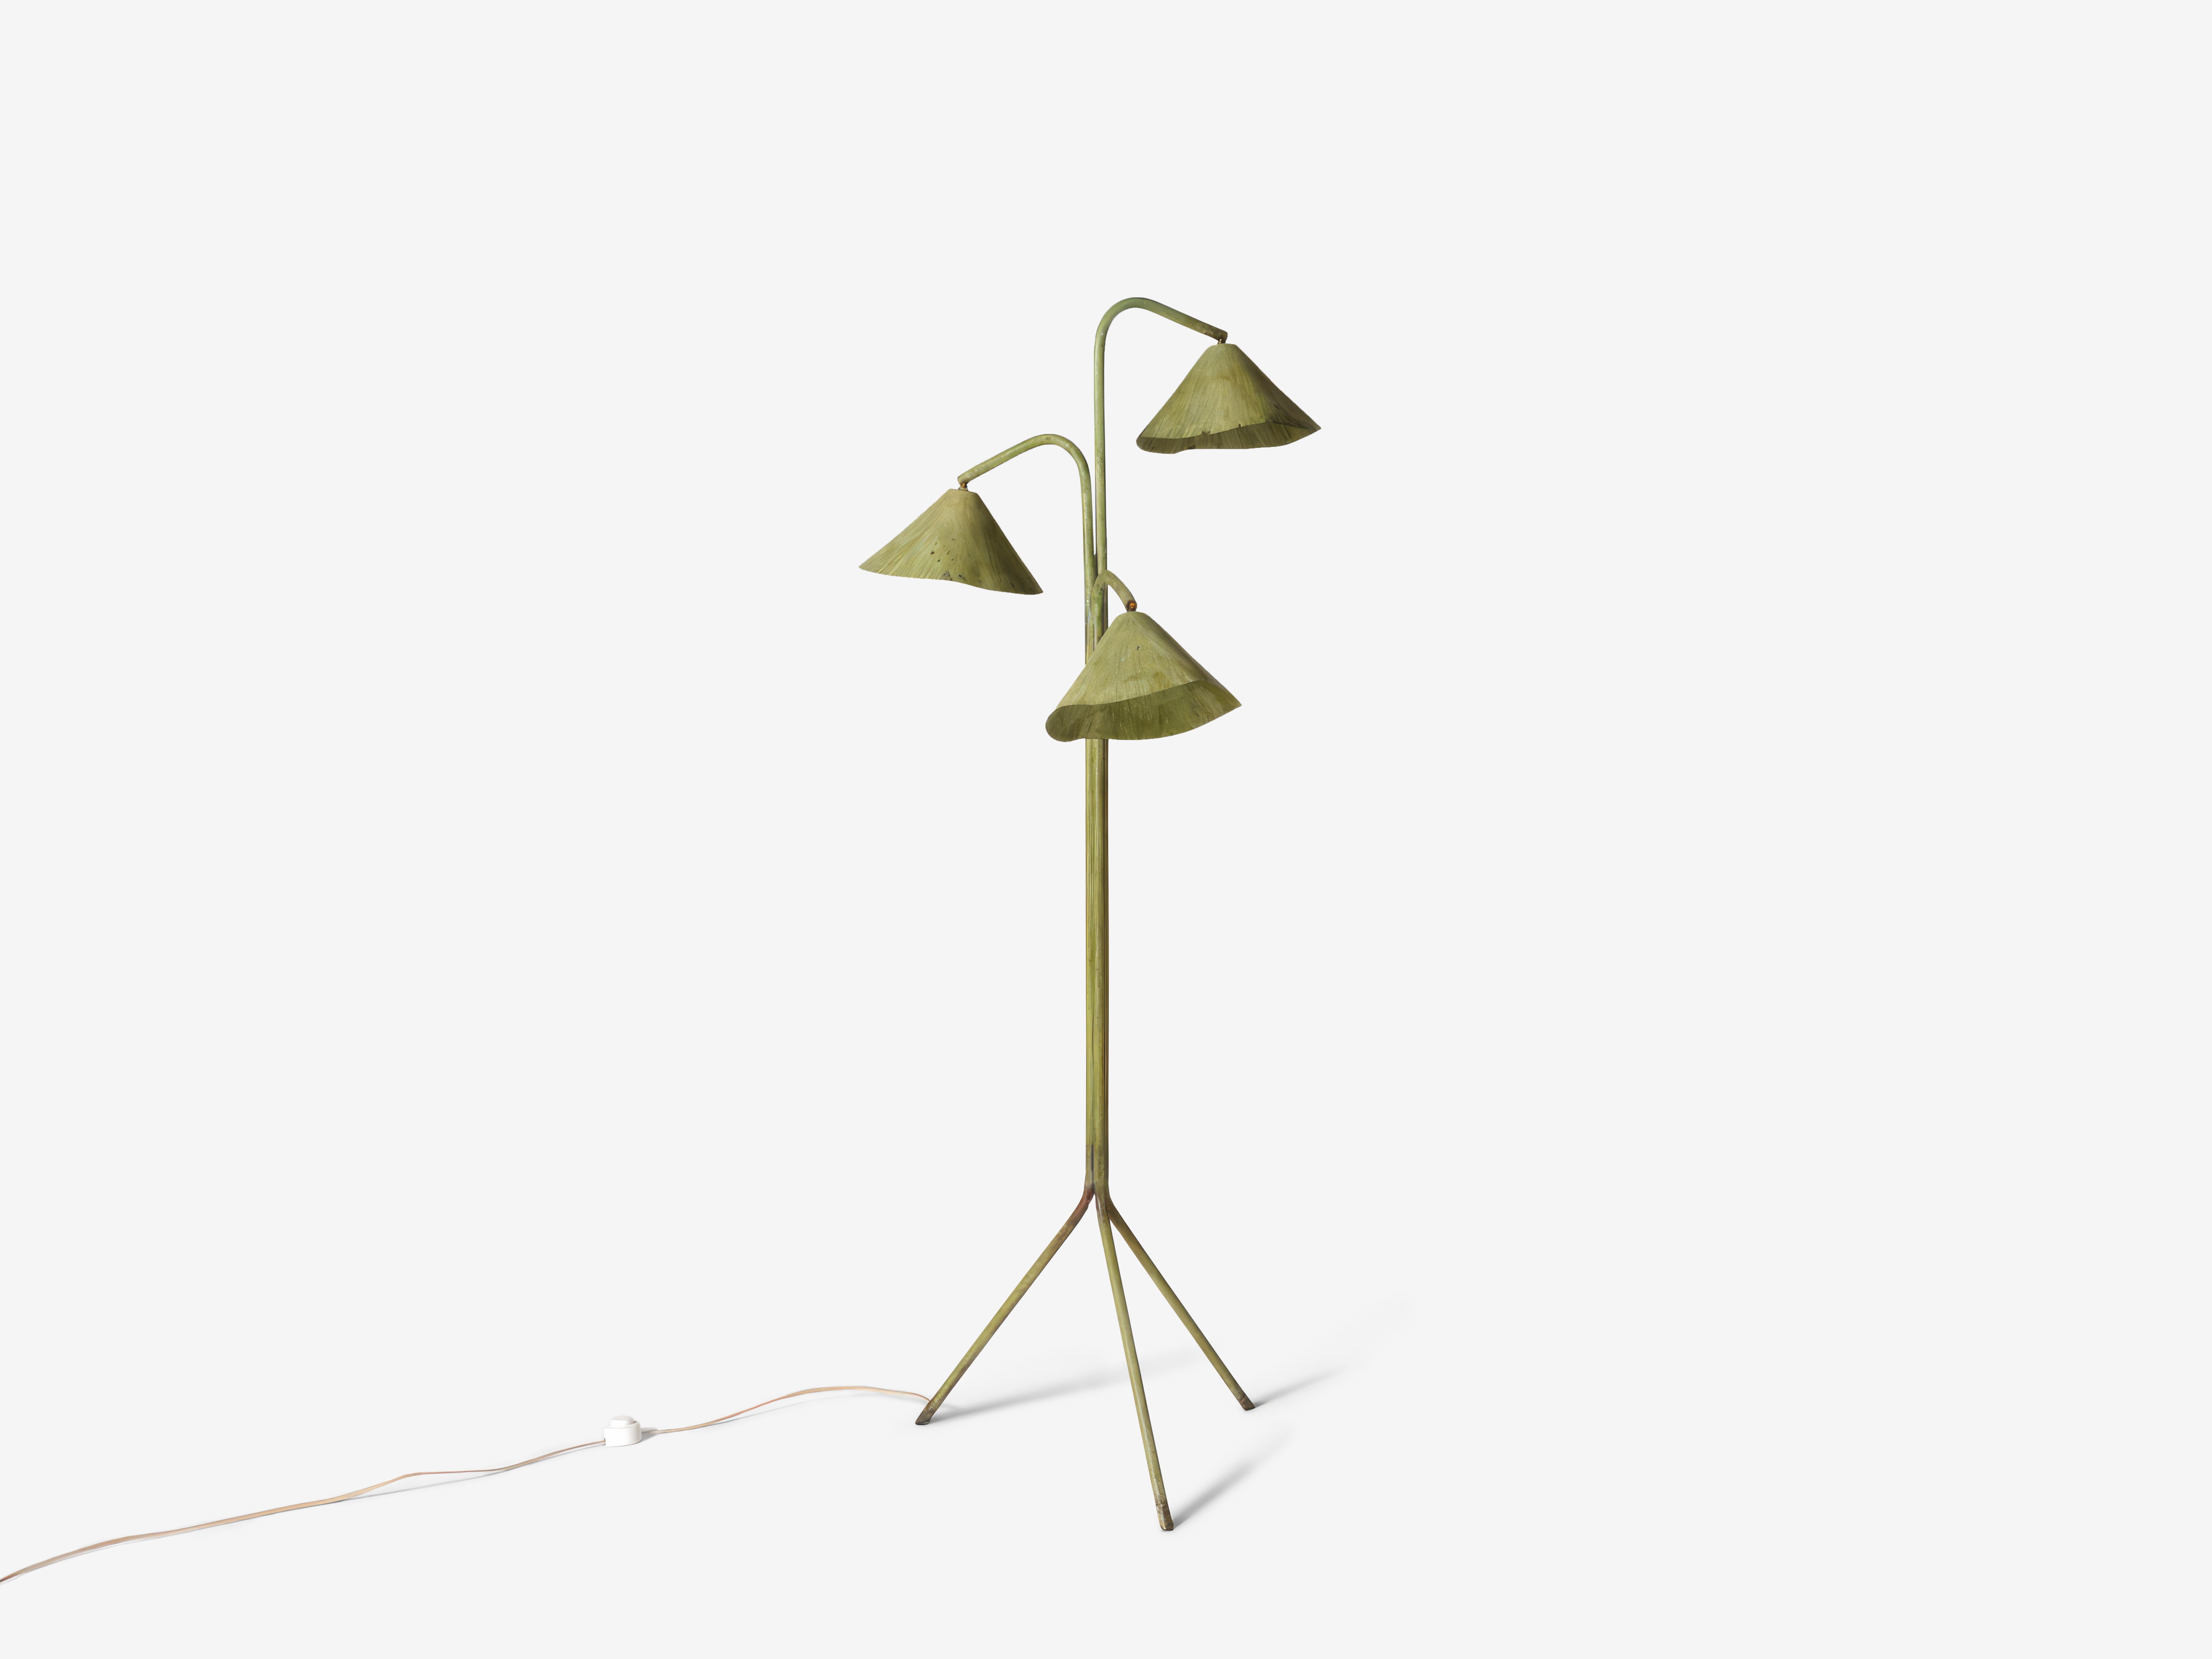 Forest Antica I Floor Lamp by OHLA STUDIO
Dimensions: D 50 x W 54 x H 150 cm 
Materials: Copper.
8 kg

Available in other finishes: Silver, Forest, and Teal.

A pre-Hispanic smithing tradition thrives by recycling copper scraps into contemporary